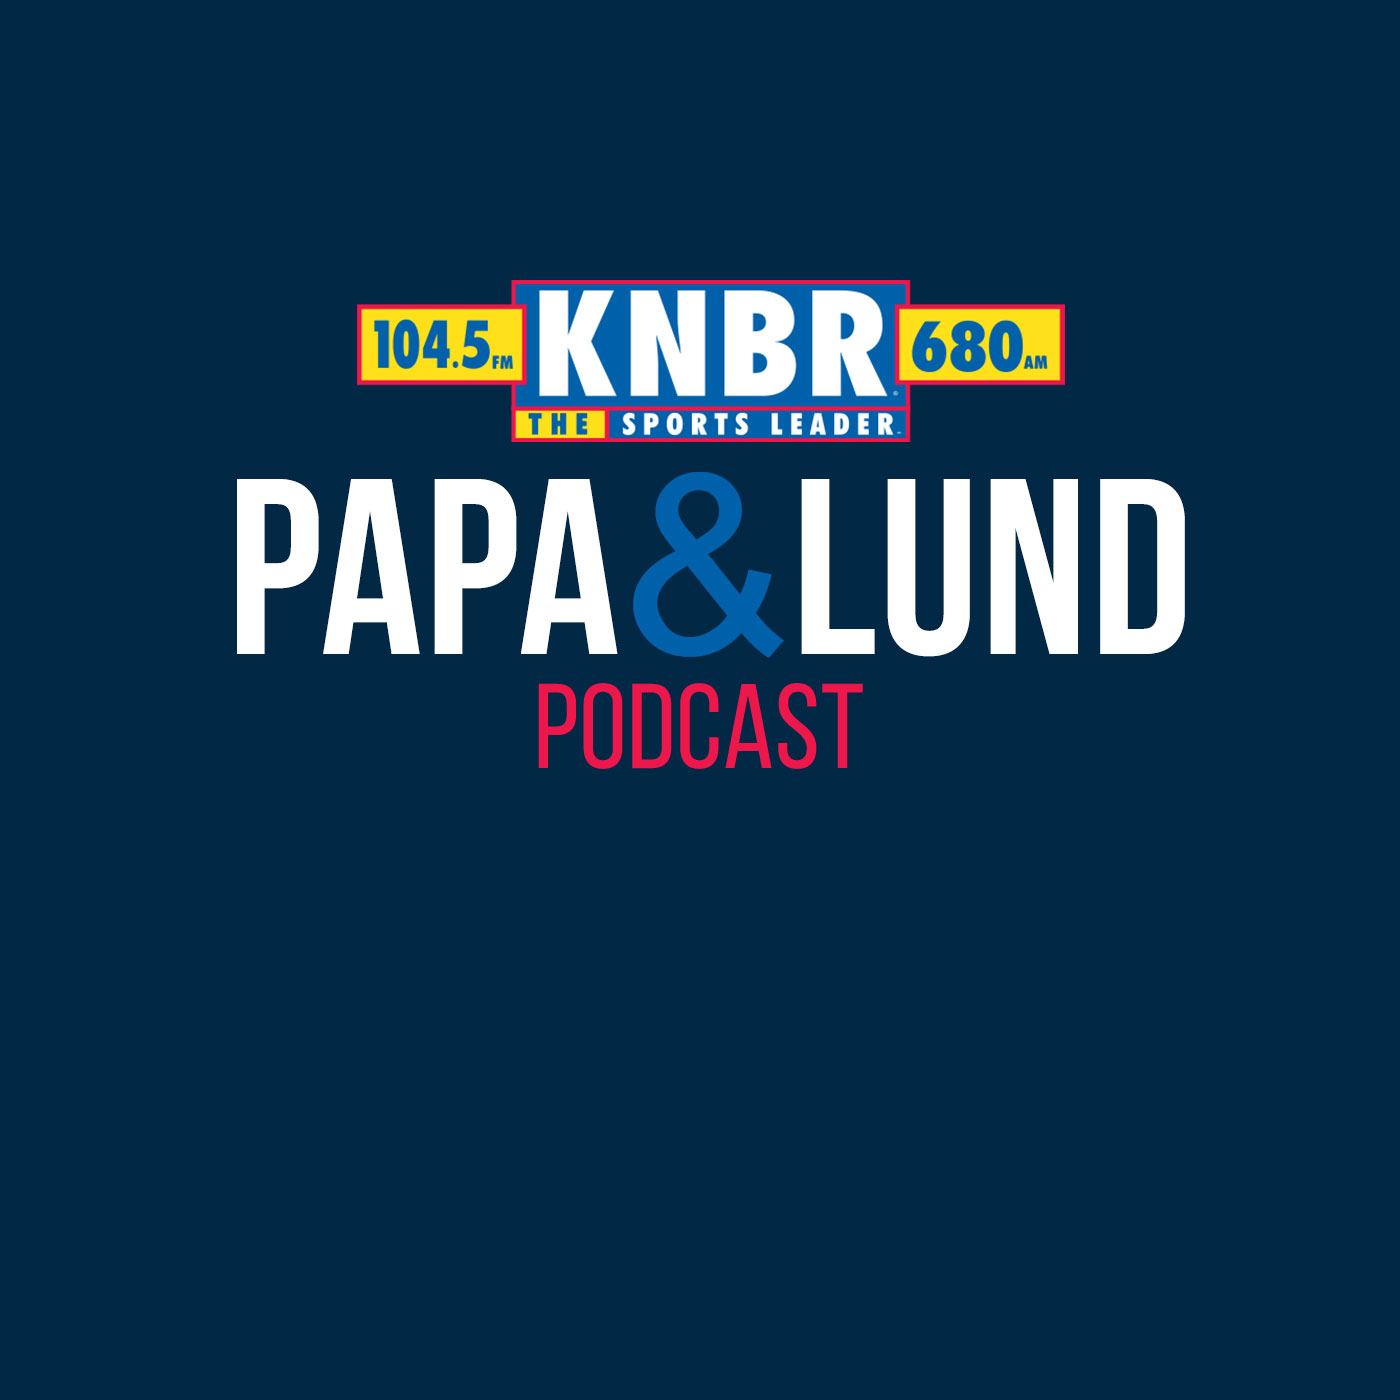 1-20 Tim Ryan joins Papa and Lund to explain why Lambeau is the NFL's "football cathedral" and what the Niners need to do to secure a win Saturday